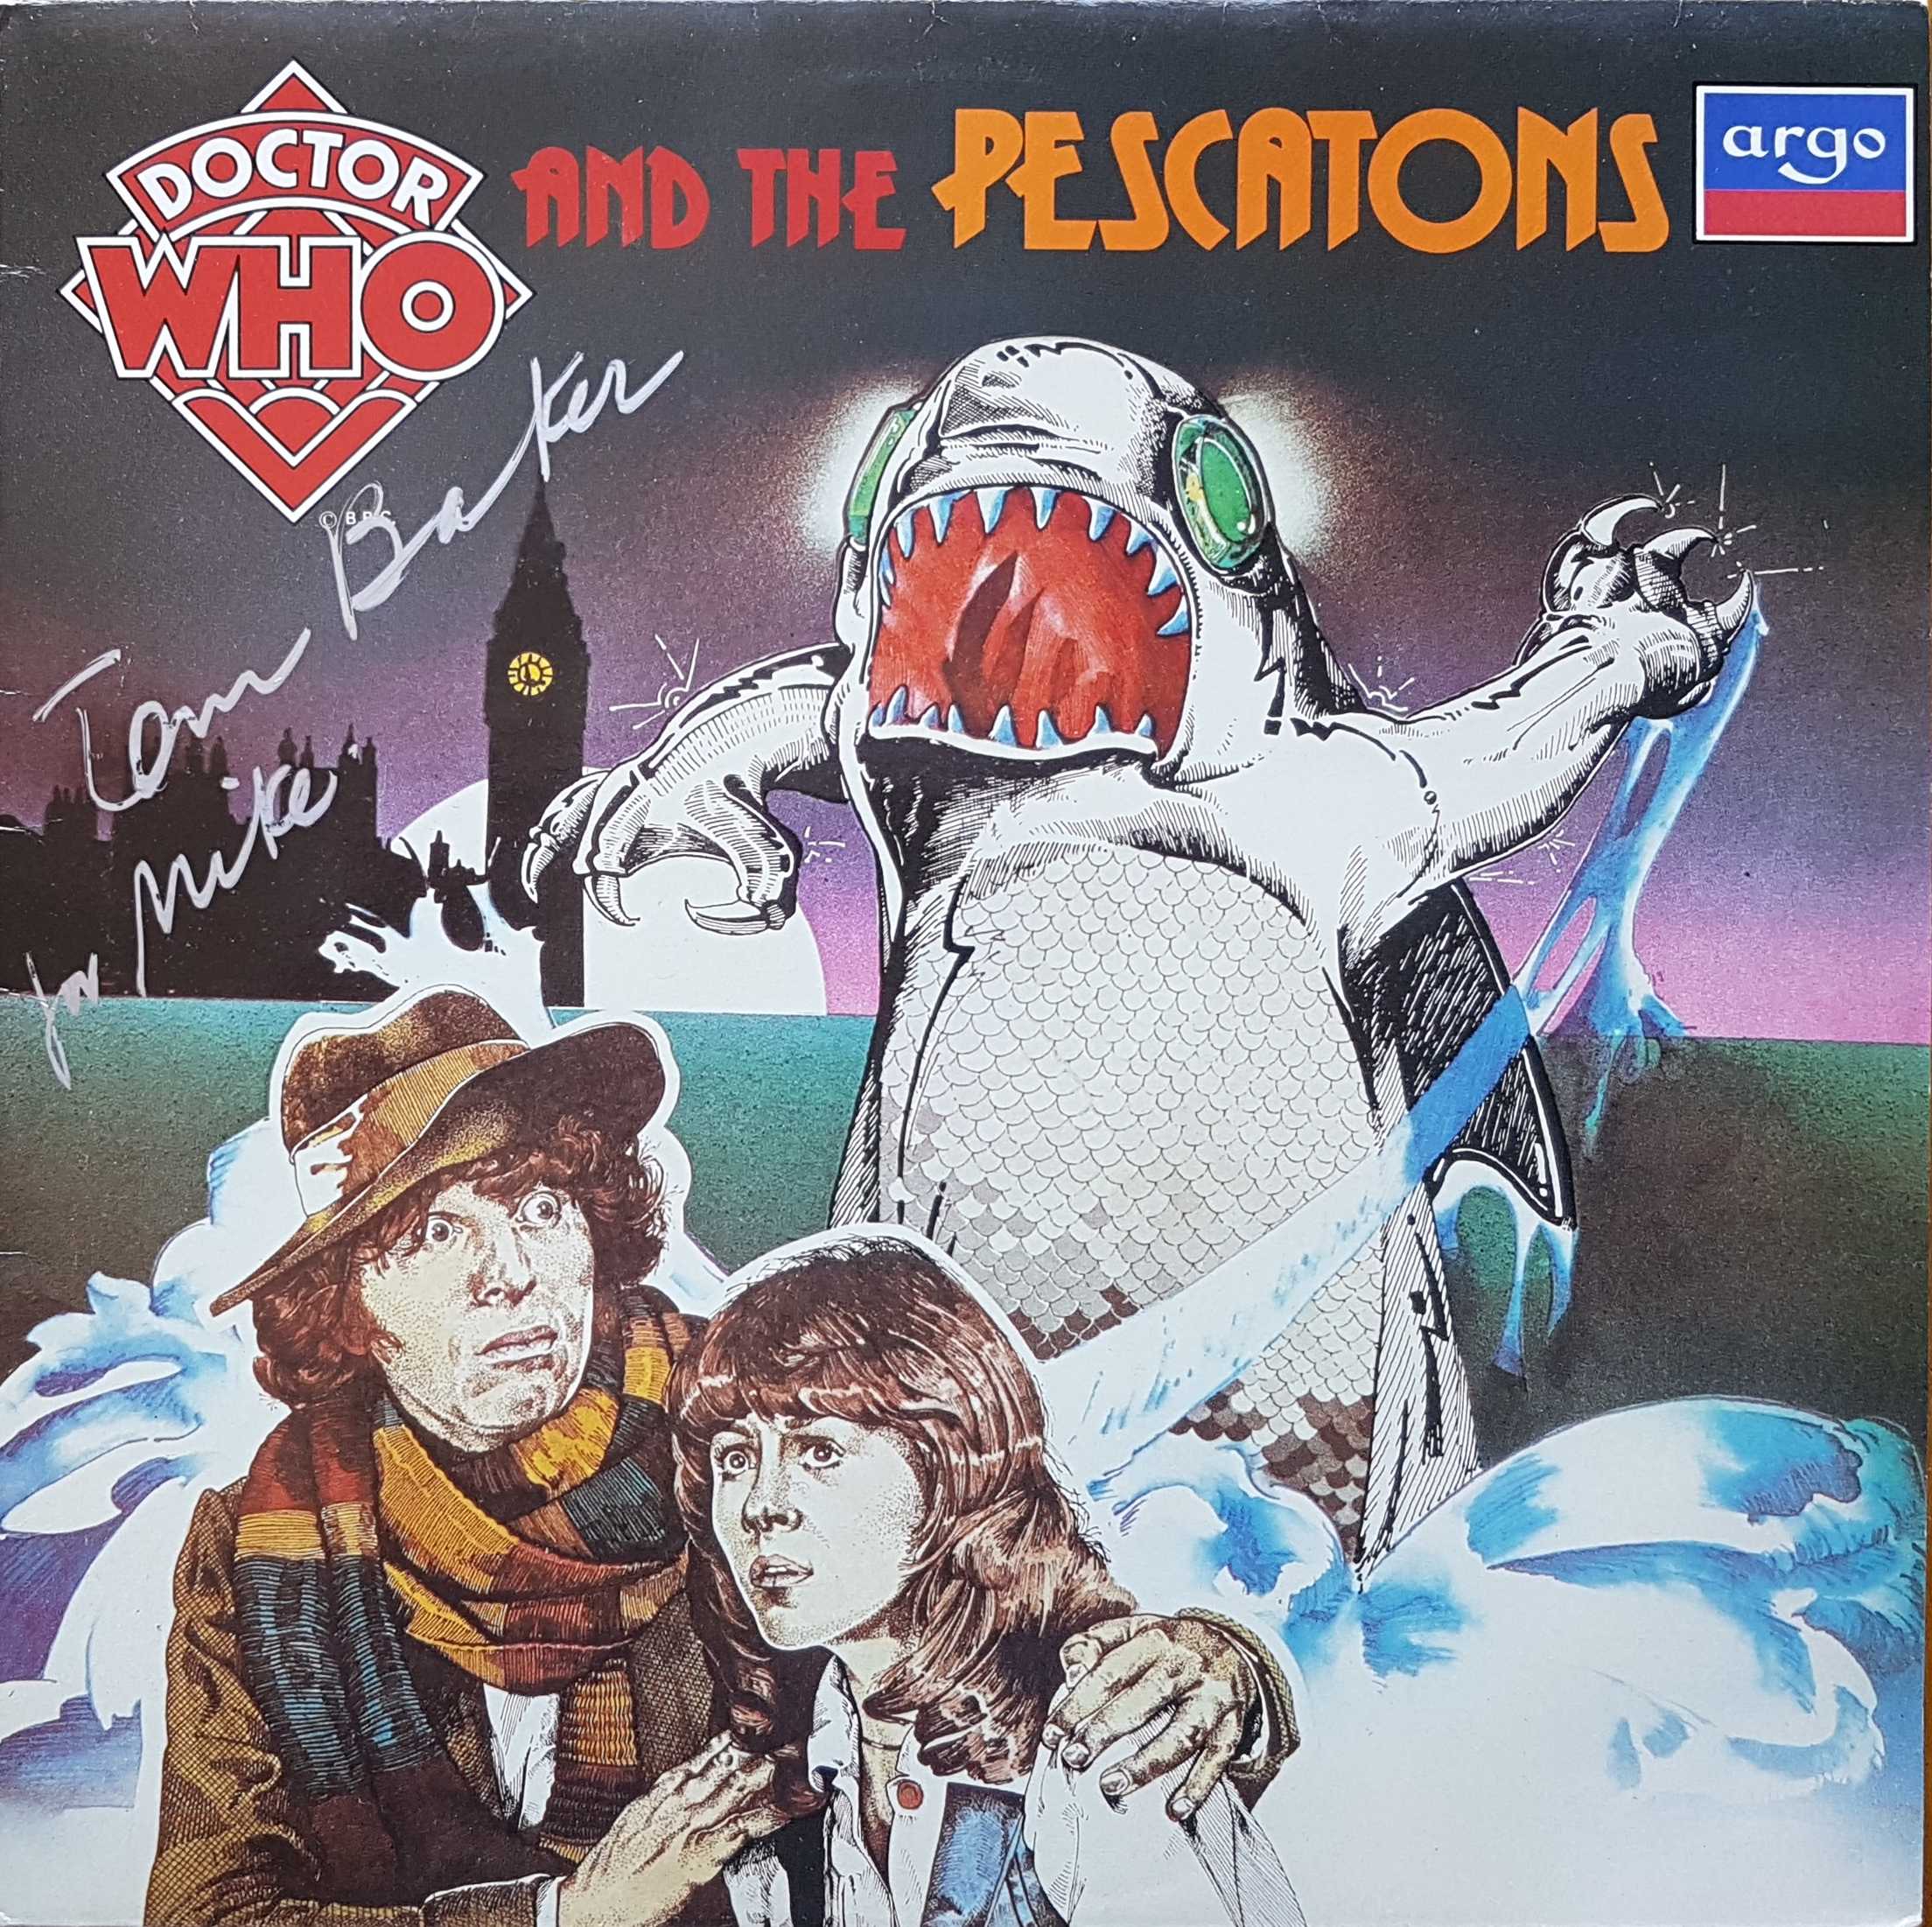 Picture of Doctor who and the Prescatons by artist Victor Pembleton from the BBC albums - Records and Tapes library